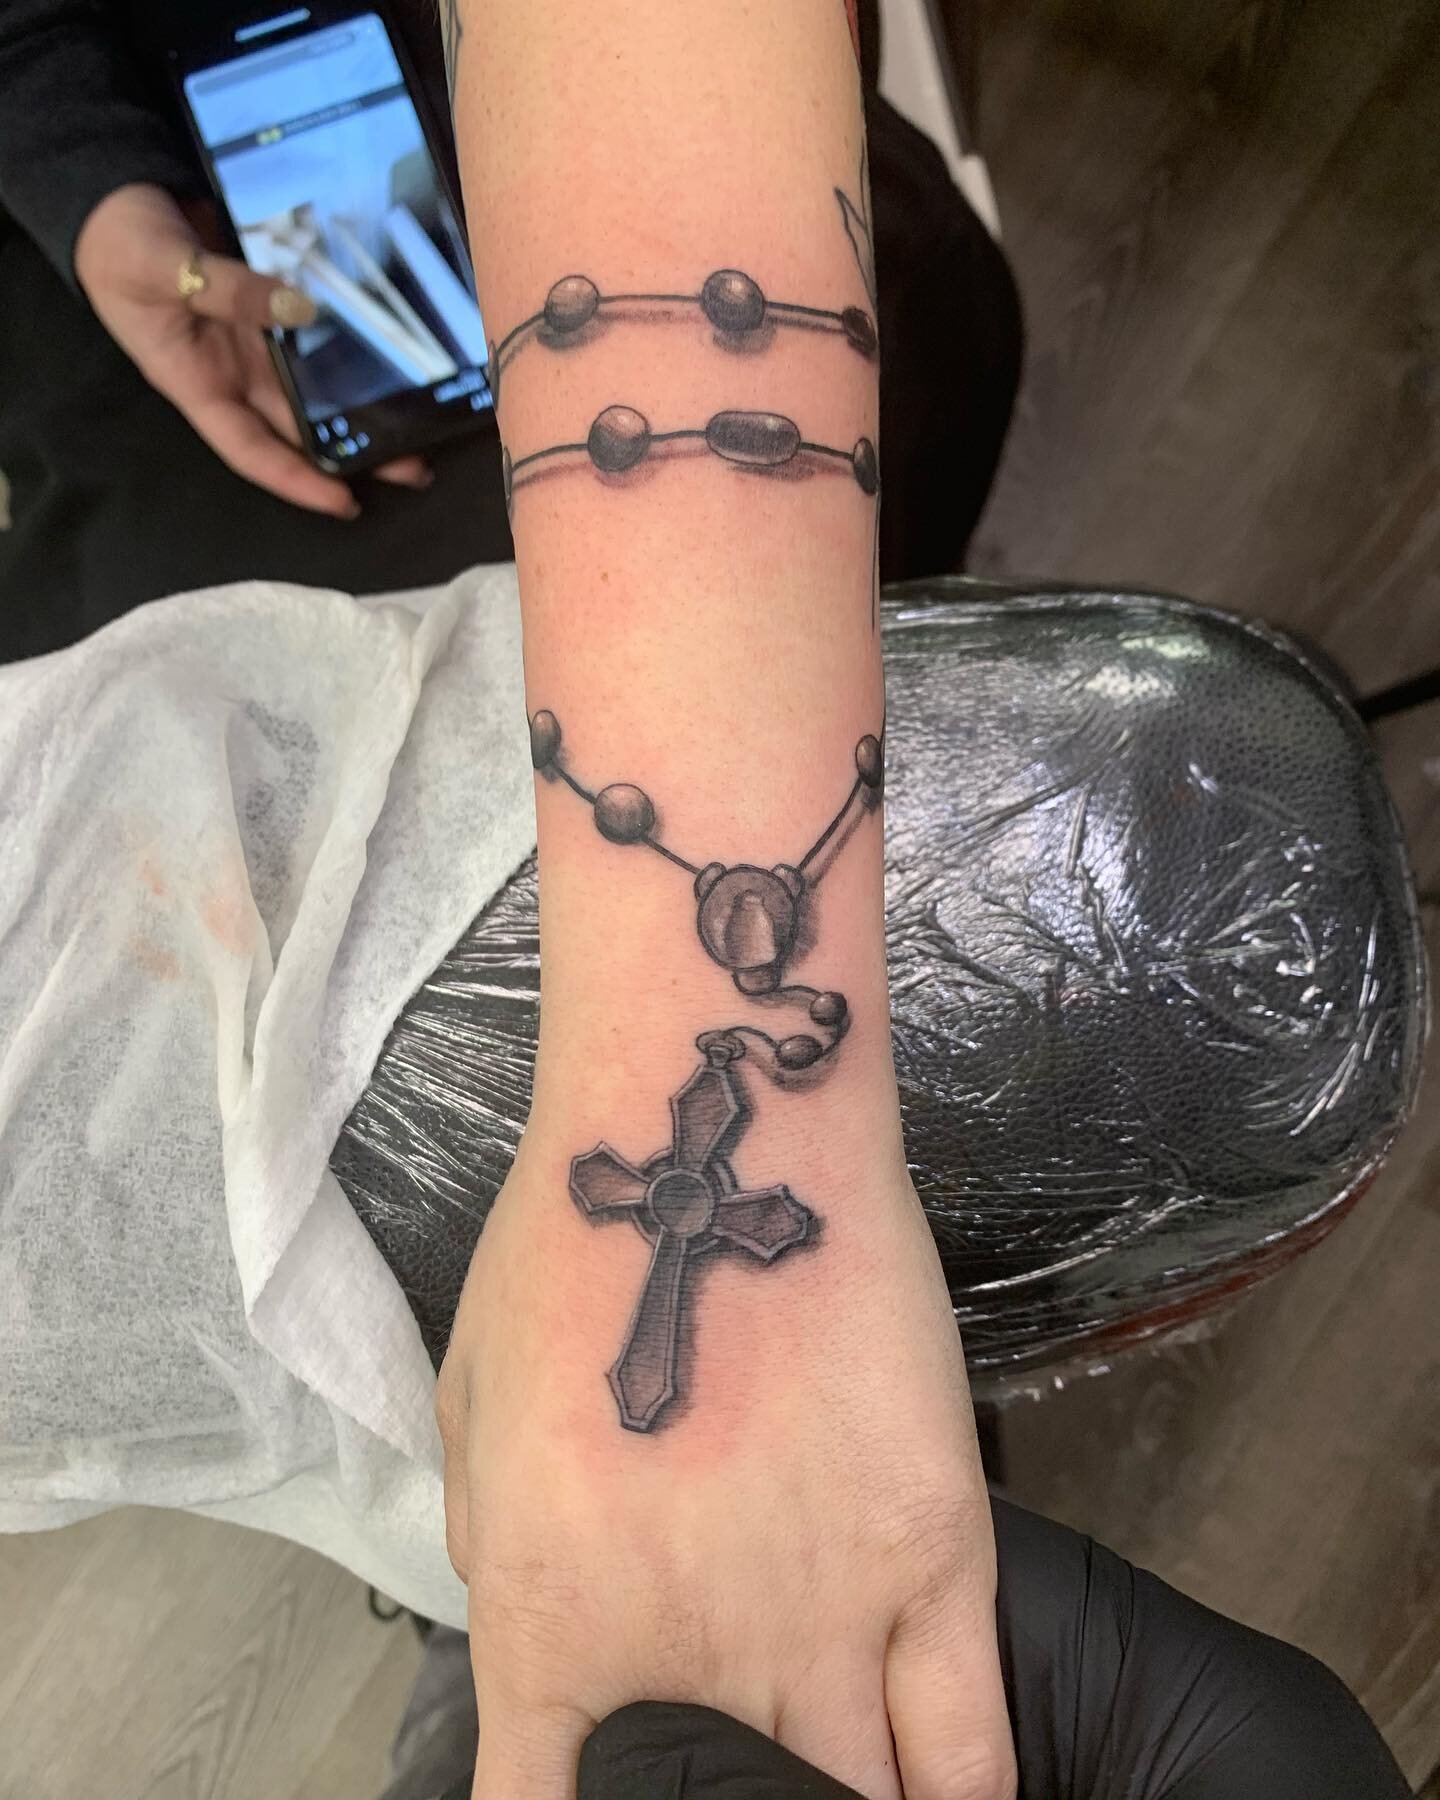 Some rosary beads i did yesterday #massachusetts #westernmasstattoo #Connecticut #connecticuttattoo #southwindsor #angrypenciltattoo #tattoo #tattoos #eternalink #hivecaps #saniderm #helios #dragonsbloodbutter #MAtattoo #CTtattoo #CTtattooartist #MAt